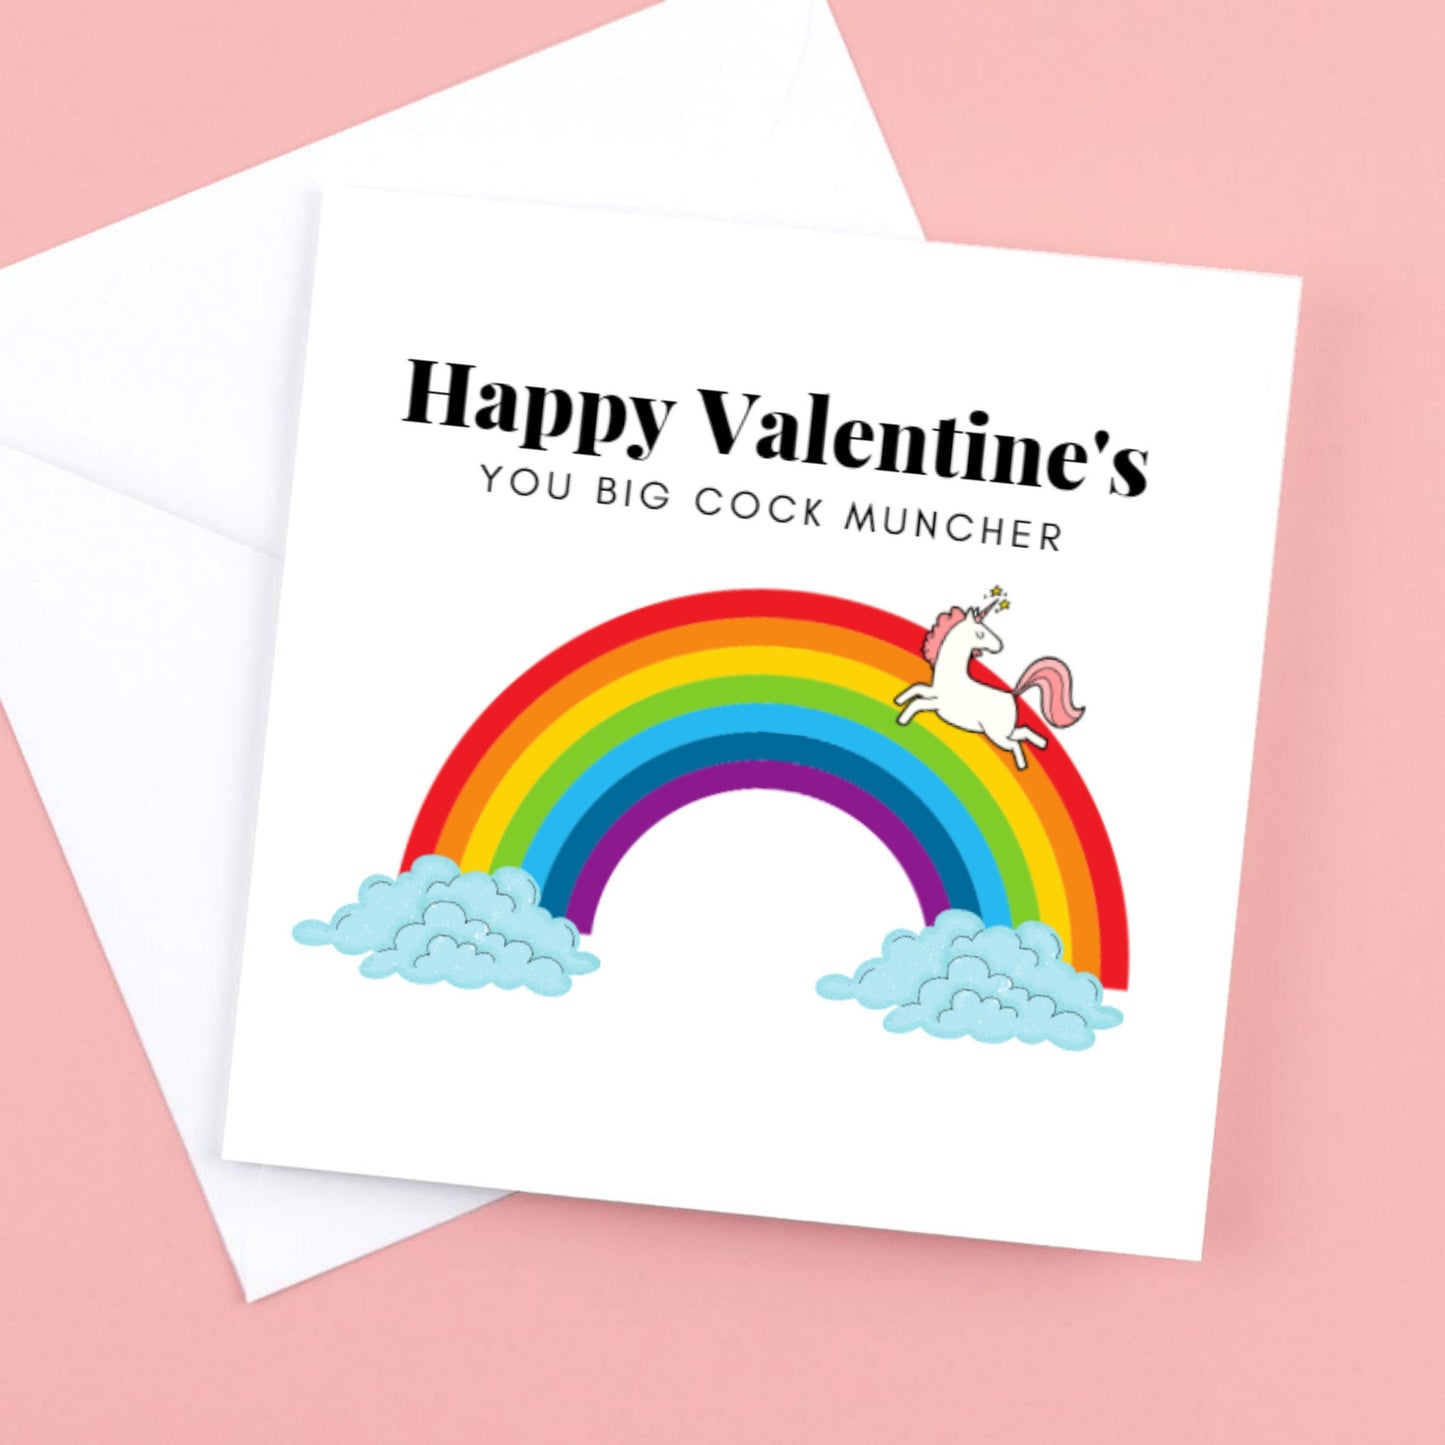 Funny Valentines Unicorn Card, "Happy Valentines you big cock muncher" with rainbow